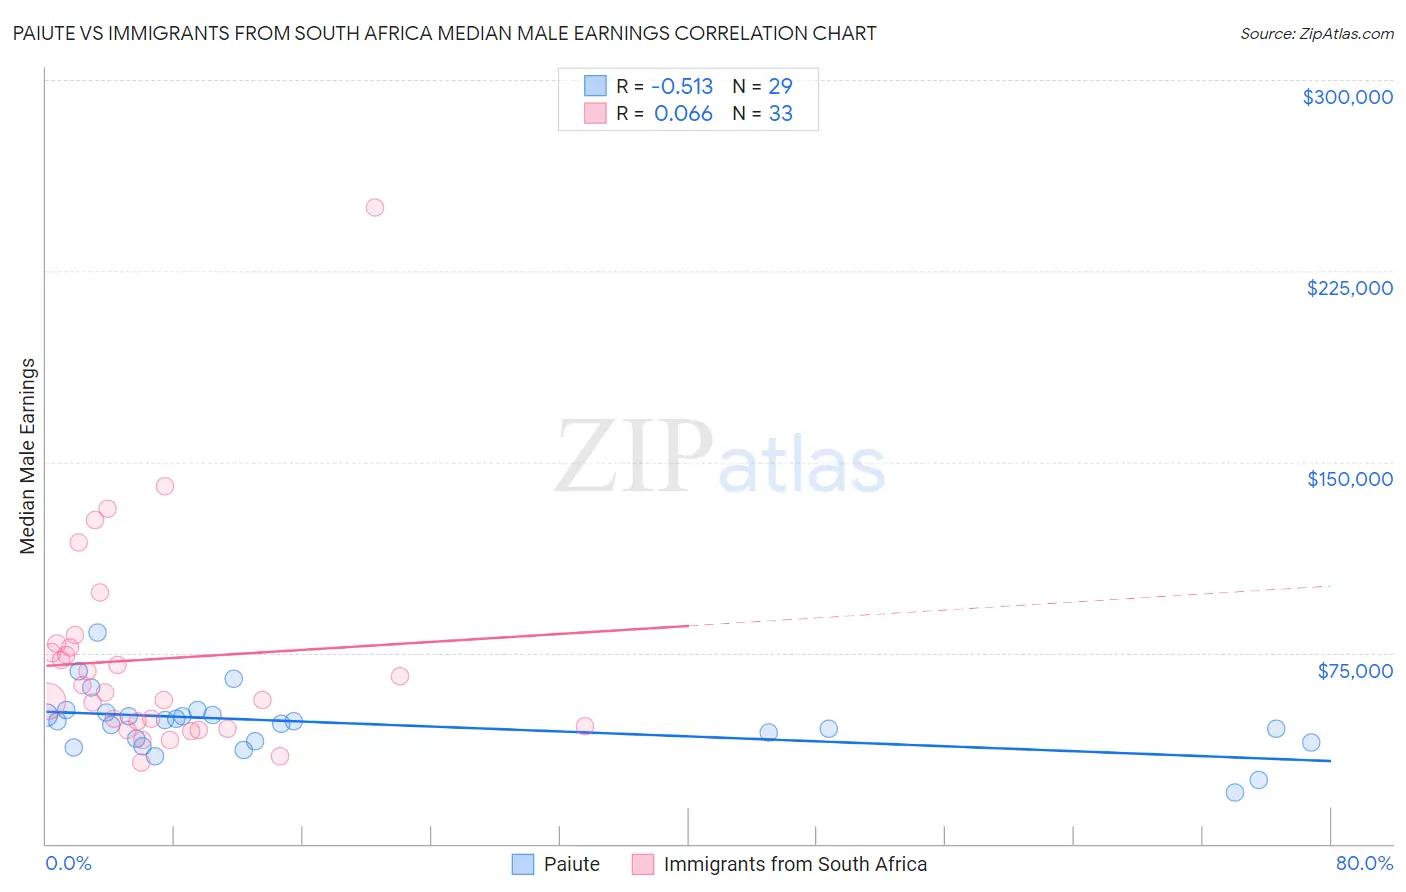 Paiute vs Immigrants from South Africa Median Male Earnings